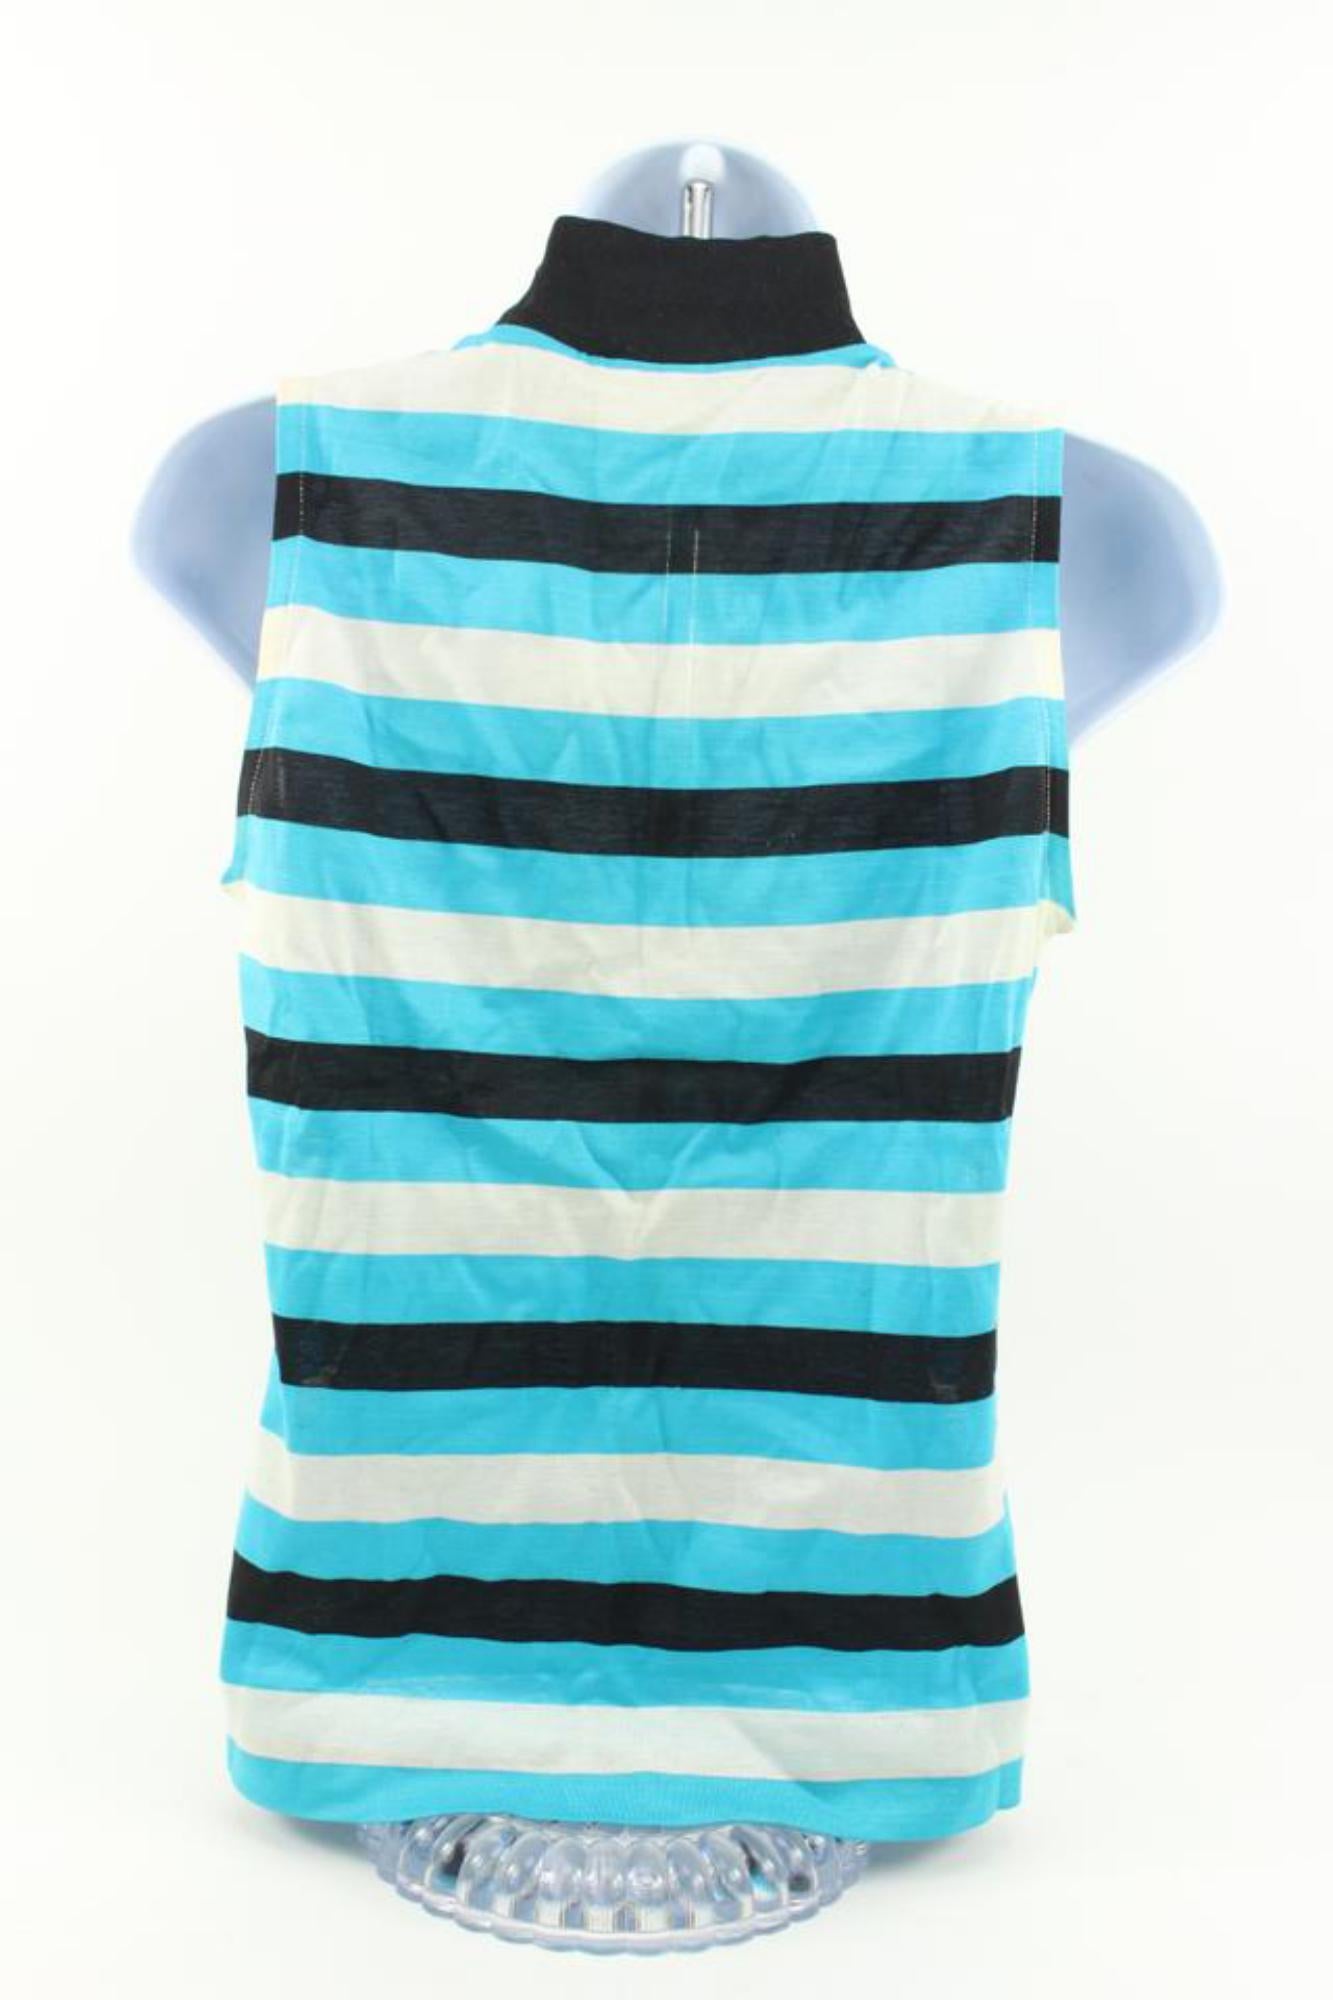 Gucci Rare Vintage Blue Stripe Sleeveless Turtleneck Vest Shirt 114g13 In Excellent Condition For Sale In Dix hills, NY